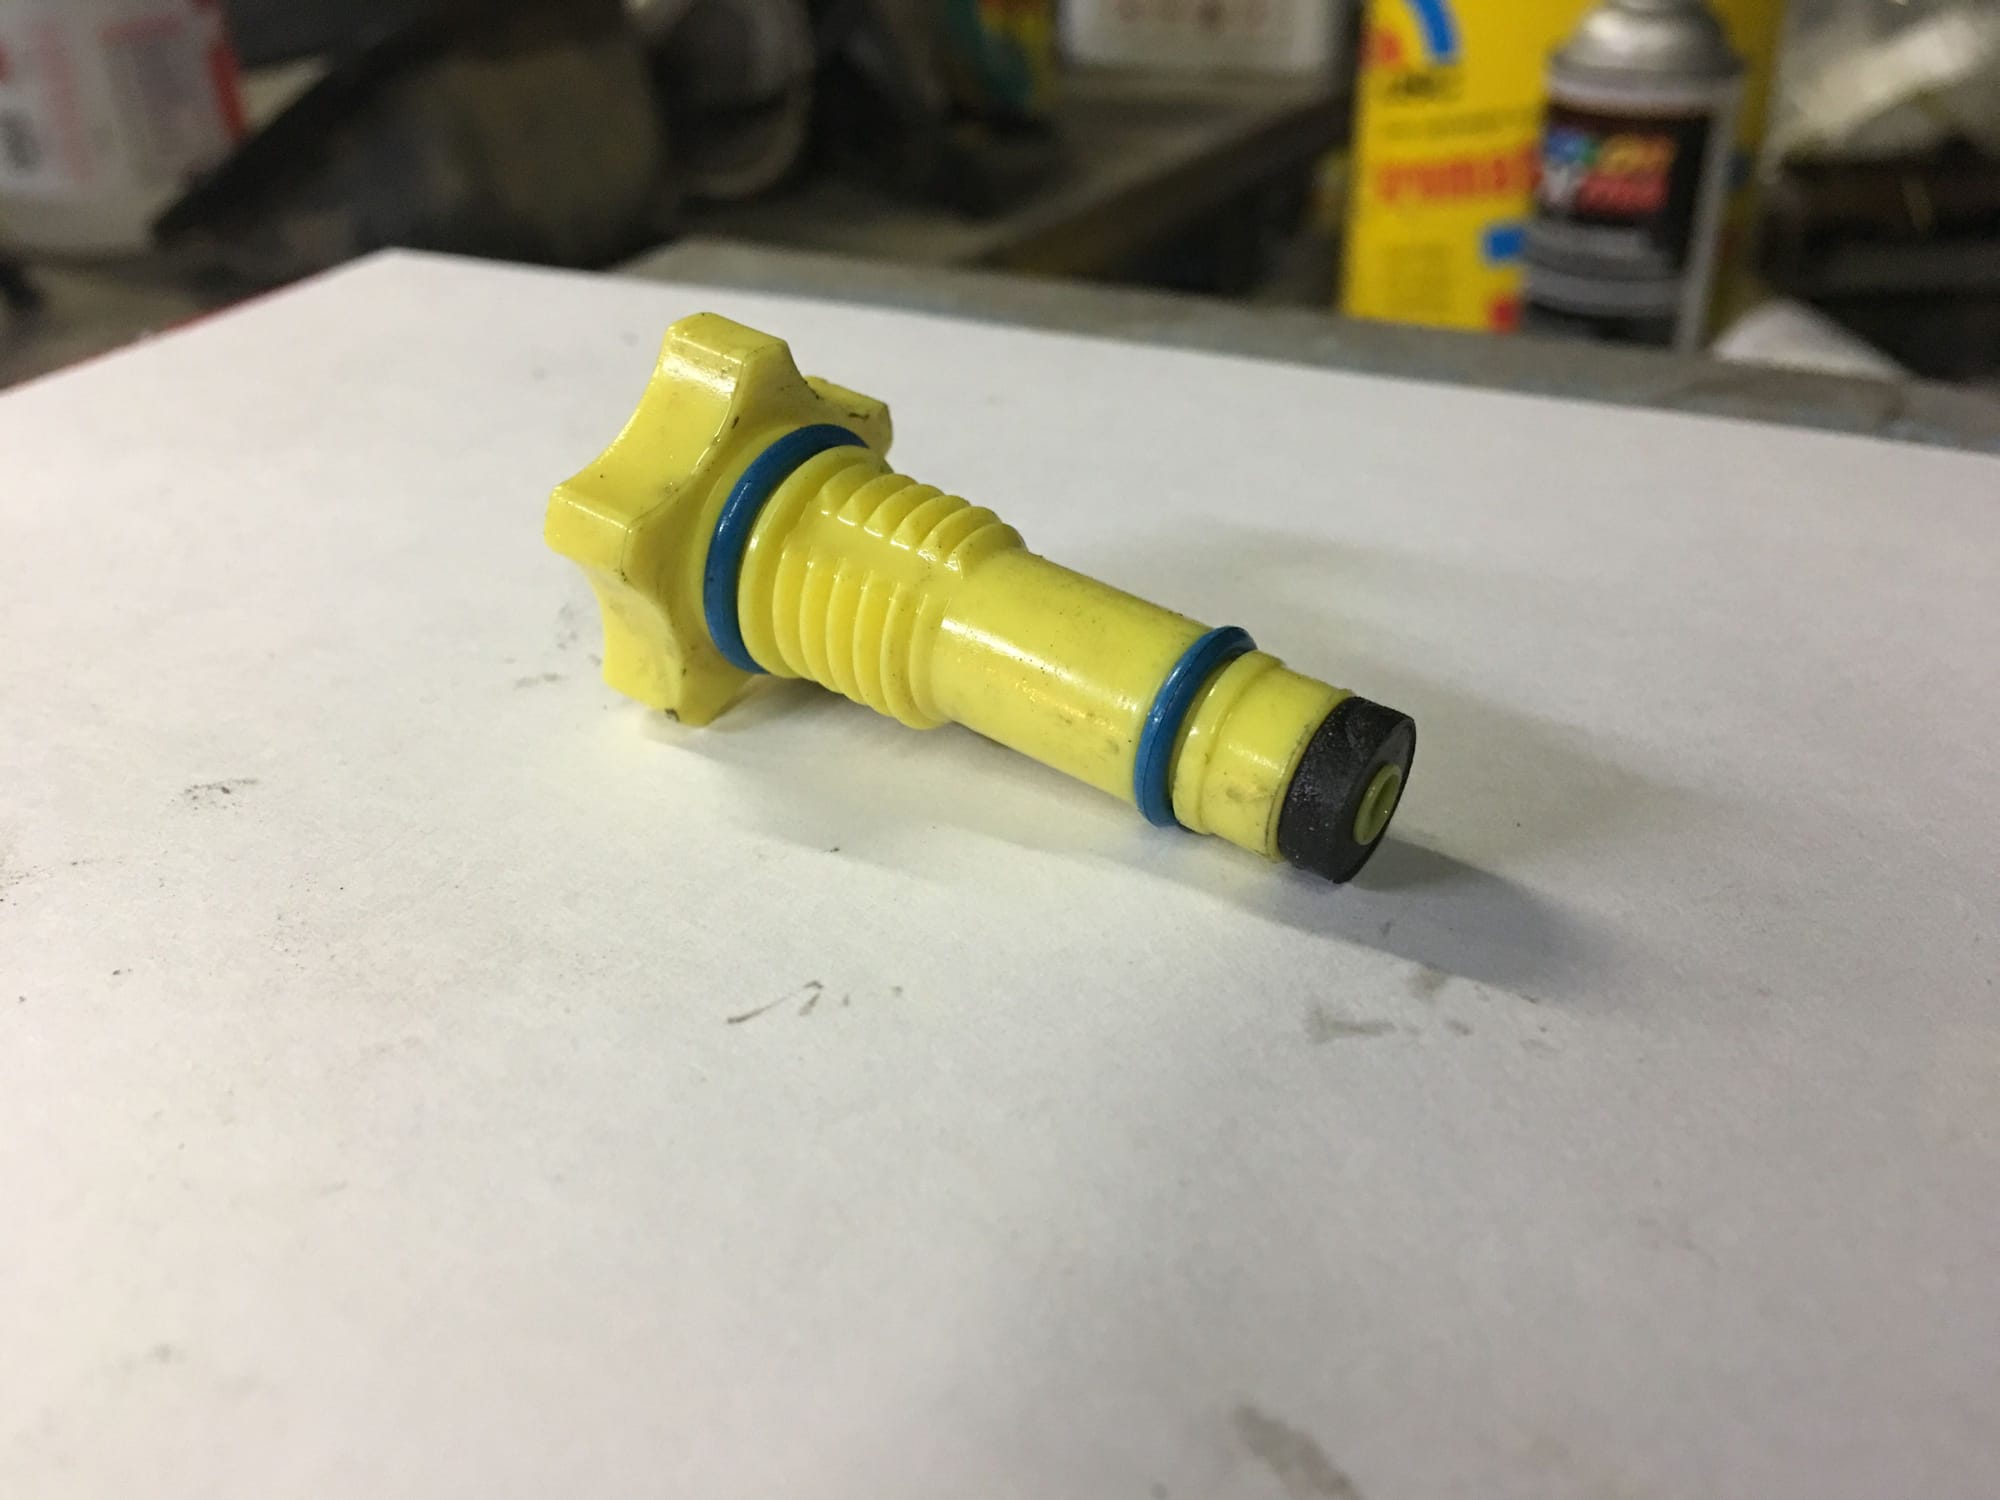 2015 Diesel fuel filter change problems - Ford Truck Enthusiasts Forums Ford 6.7 Diesel Low Fuel Pressure After Filter Change